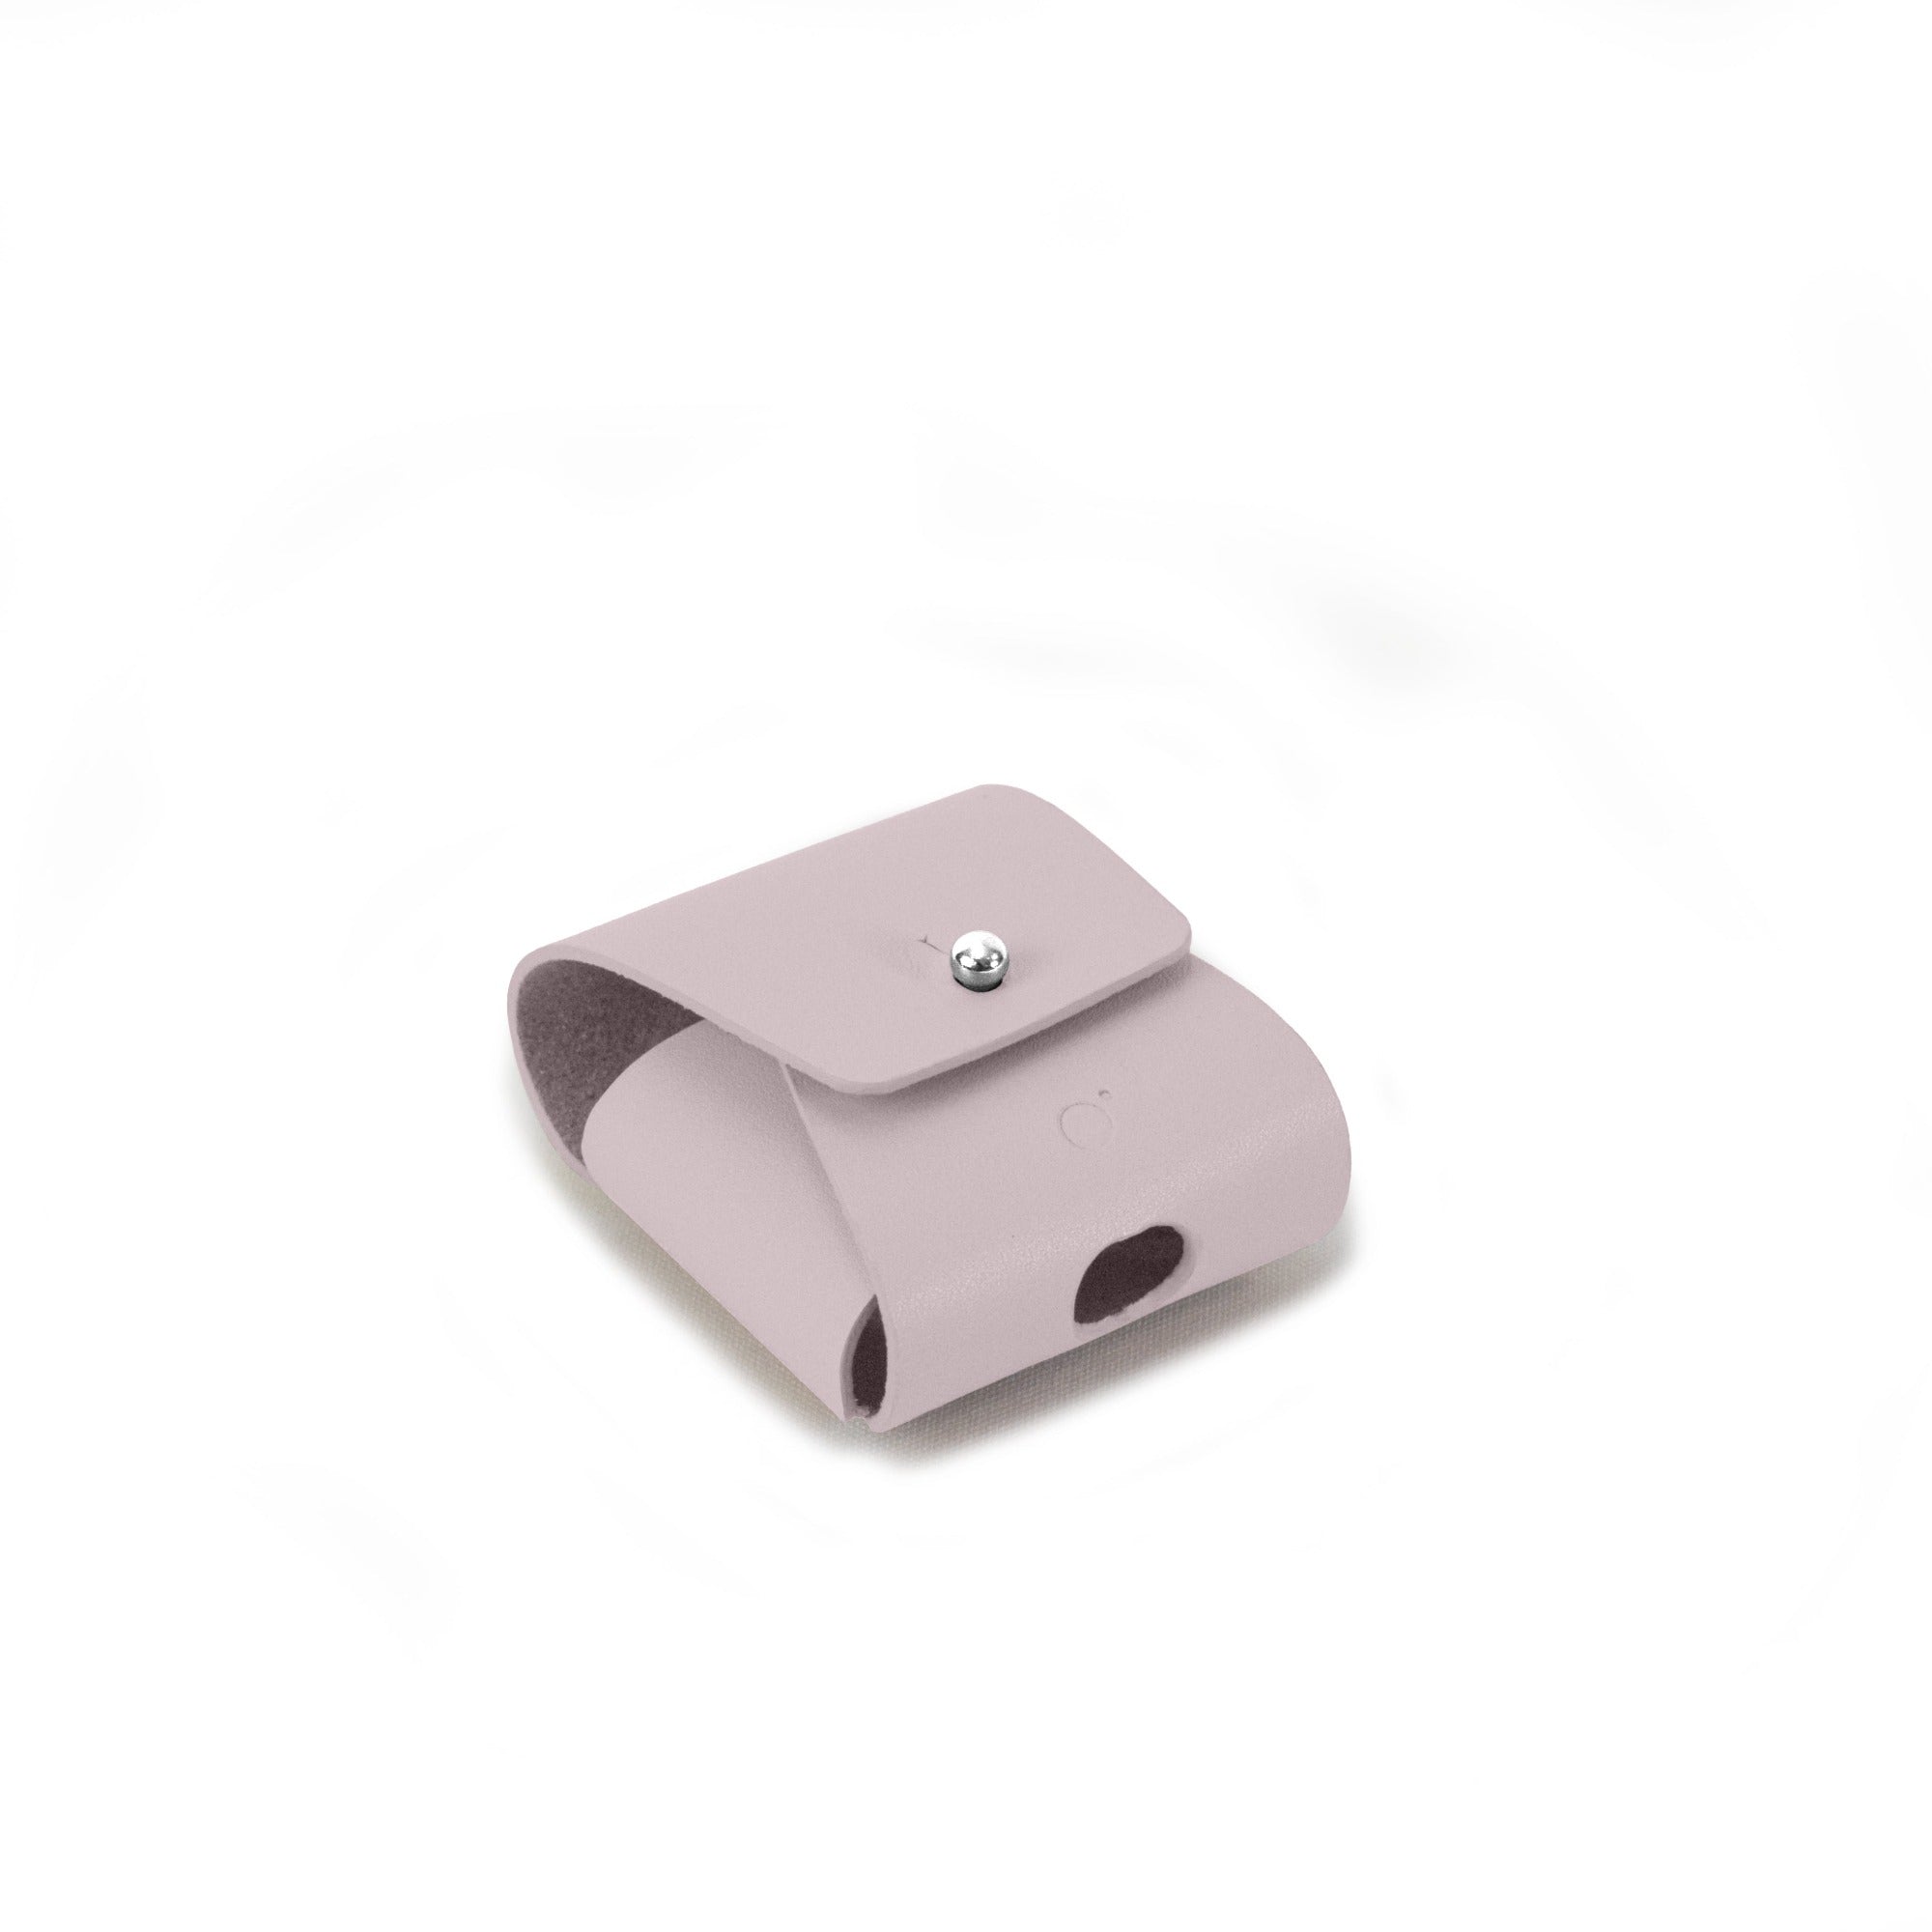 Airpod Case in Nude Pink